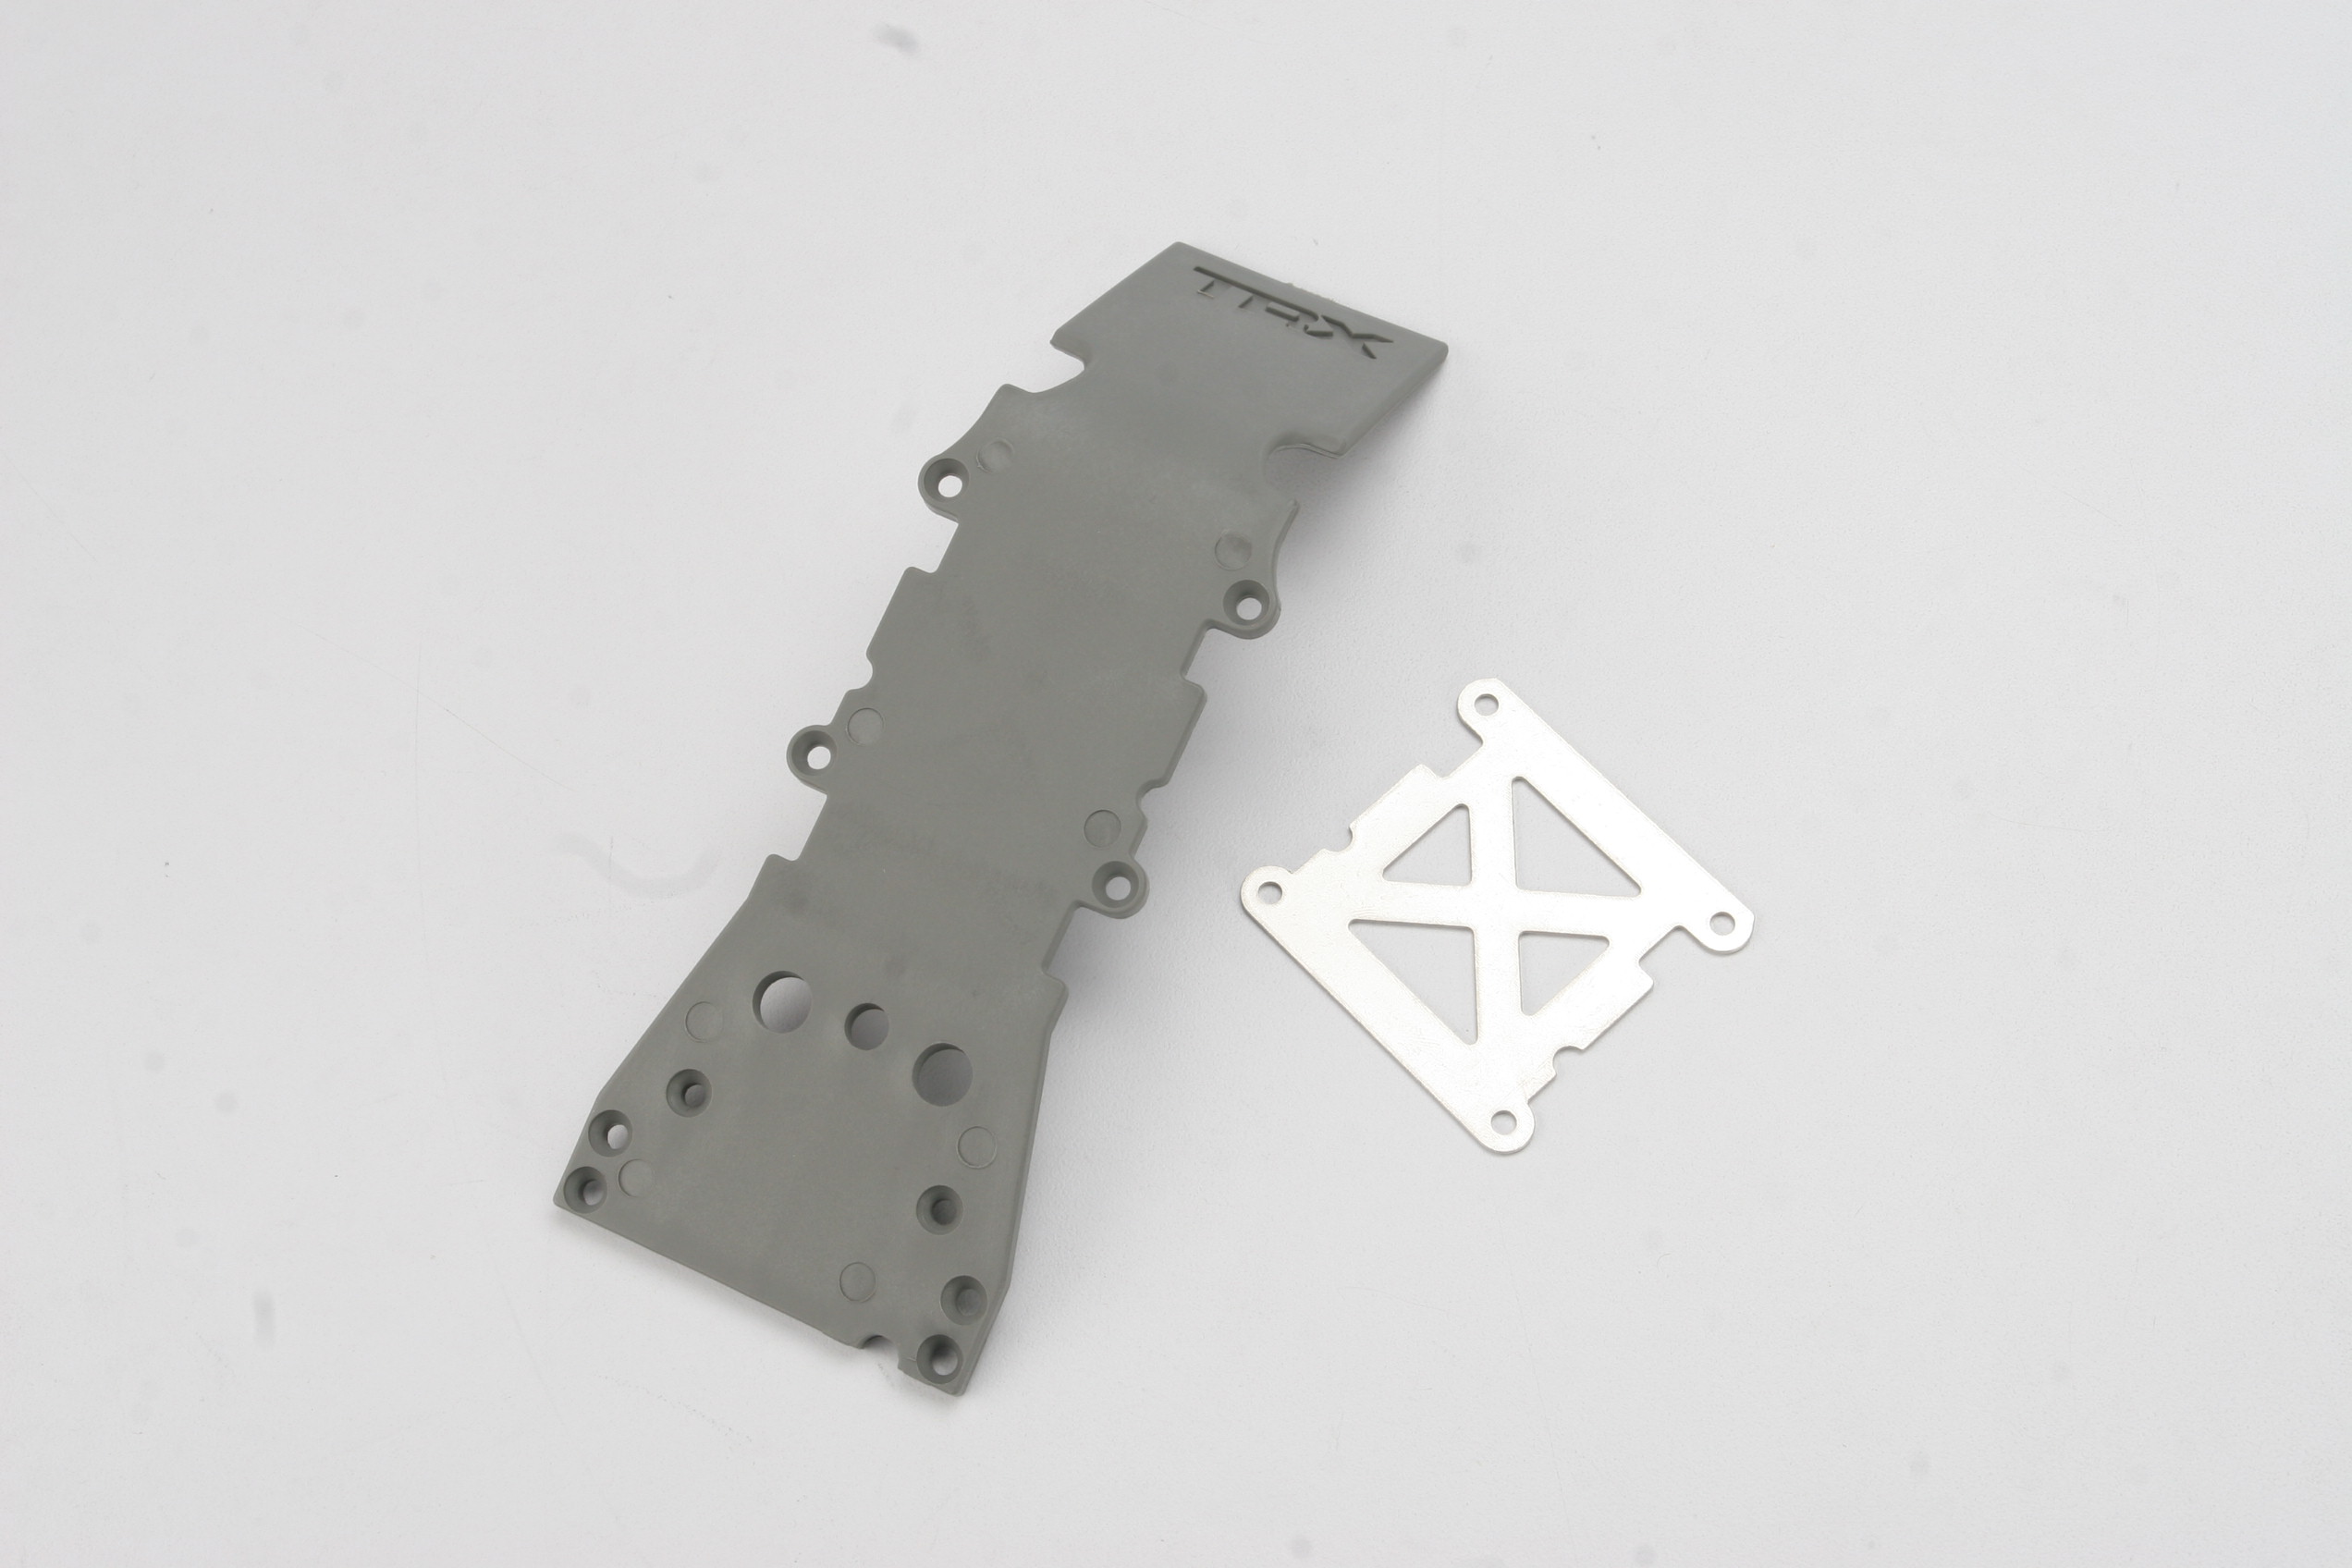 Traxxas #4937 skidplate front plastic/stainless steel plate